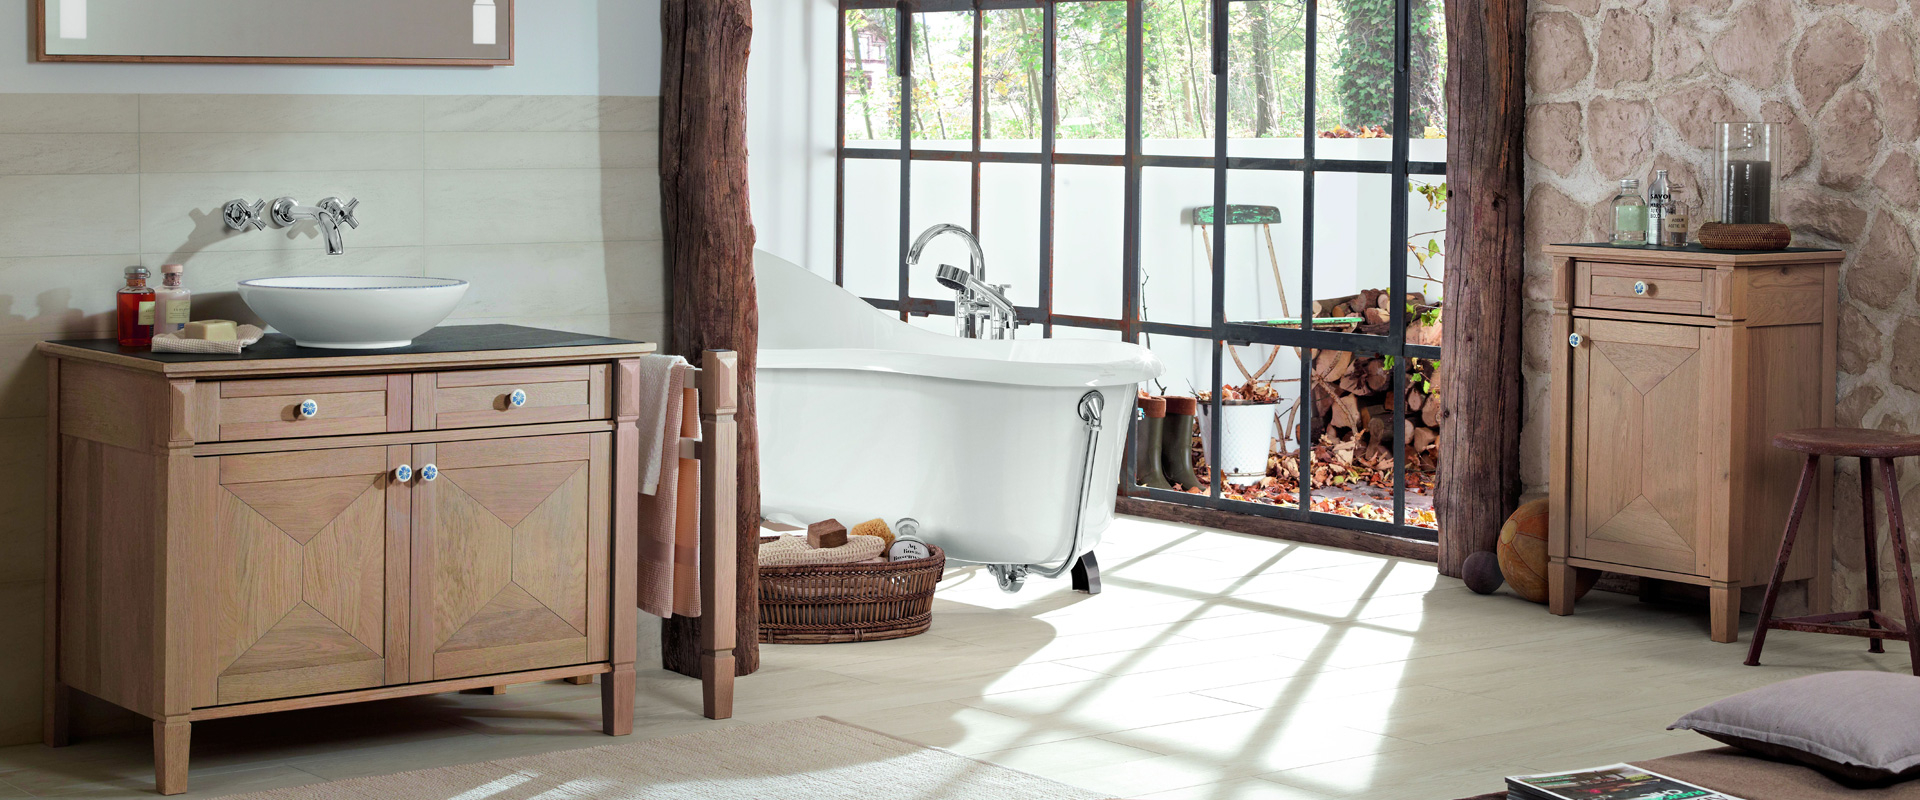 Wooden Bath Furniture Care Recommendations Villeroy Boch with regard to measurements 1920 X 800